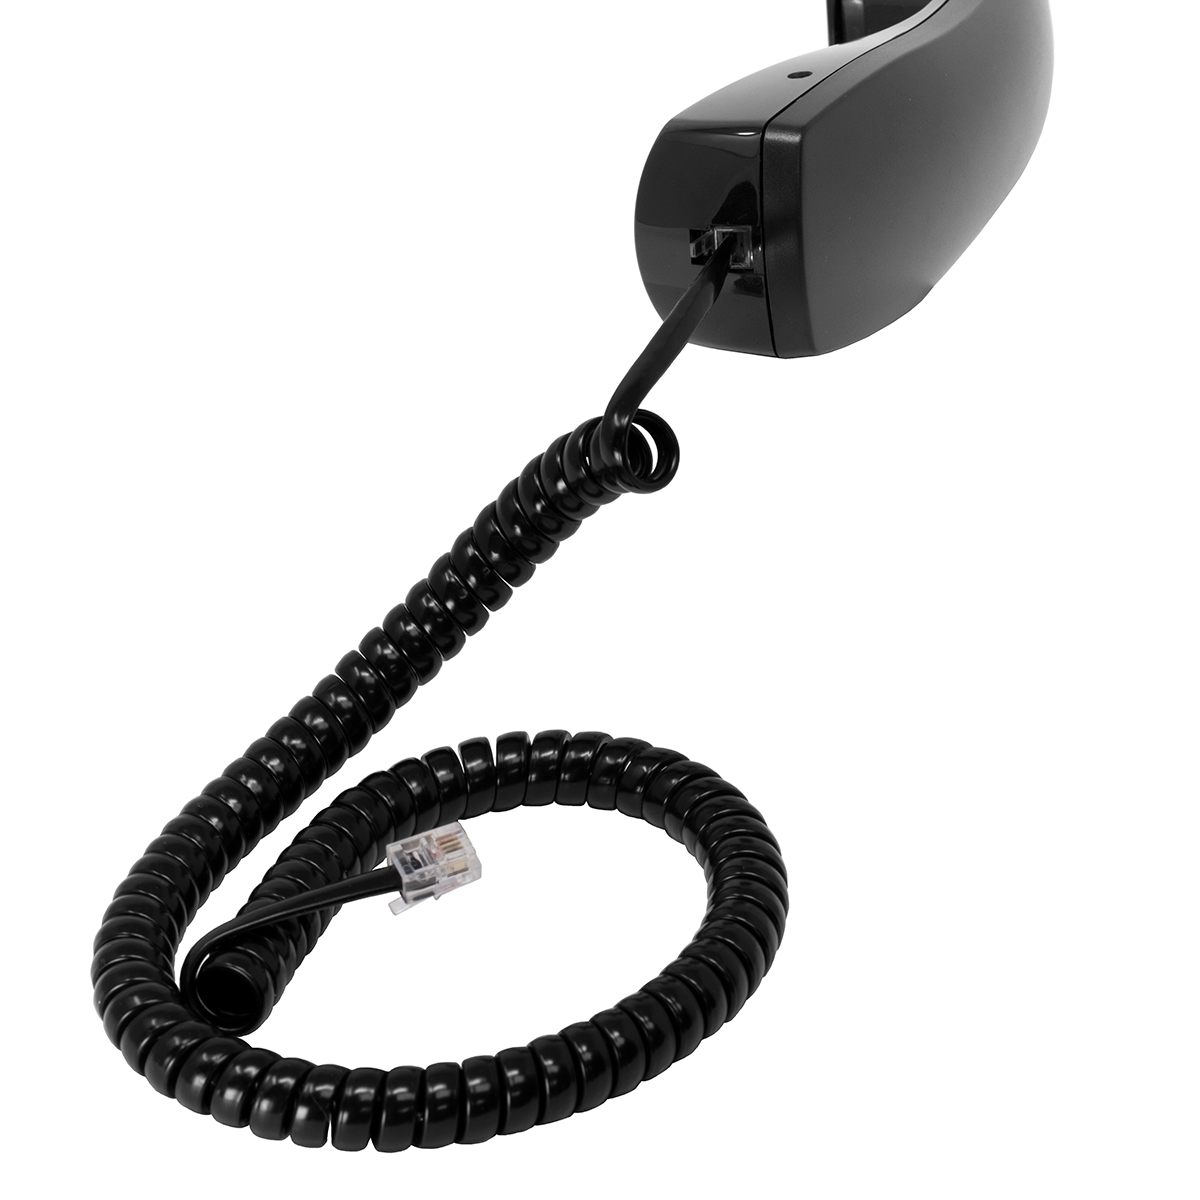 7' Black Coiled Handset Cord (Handset View)